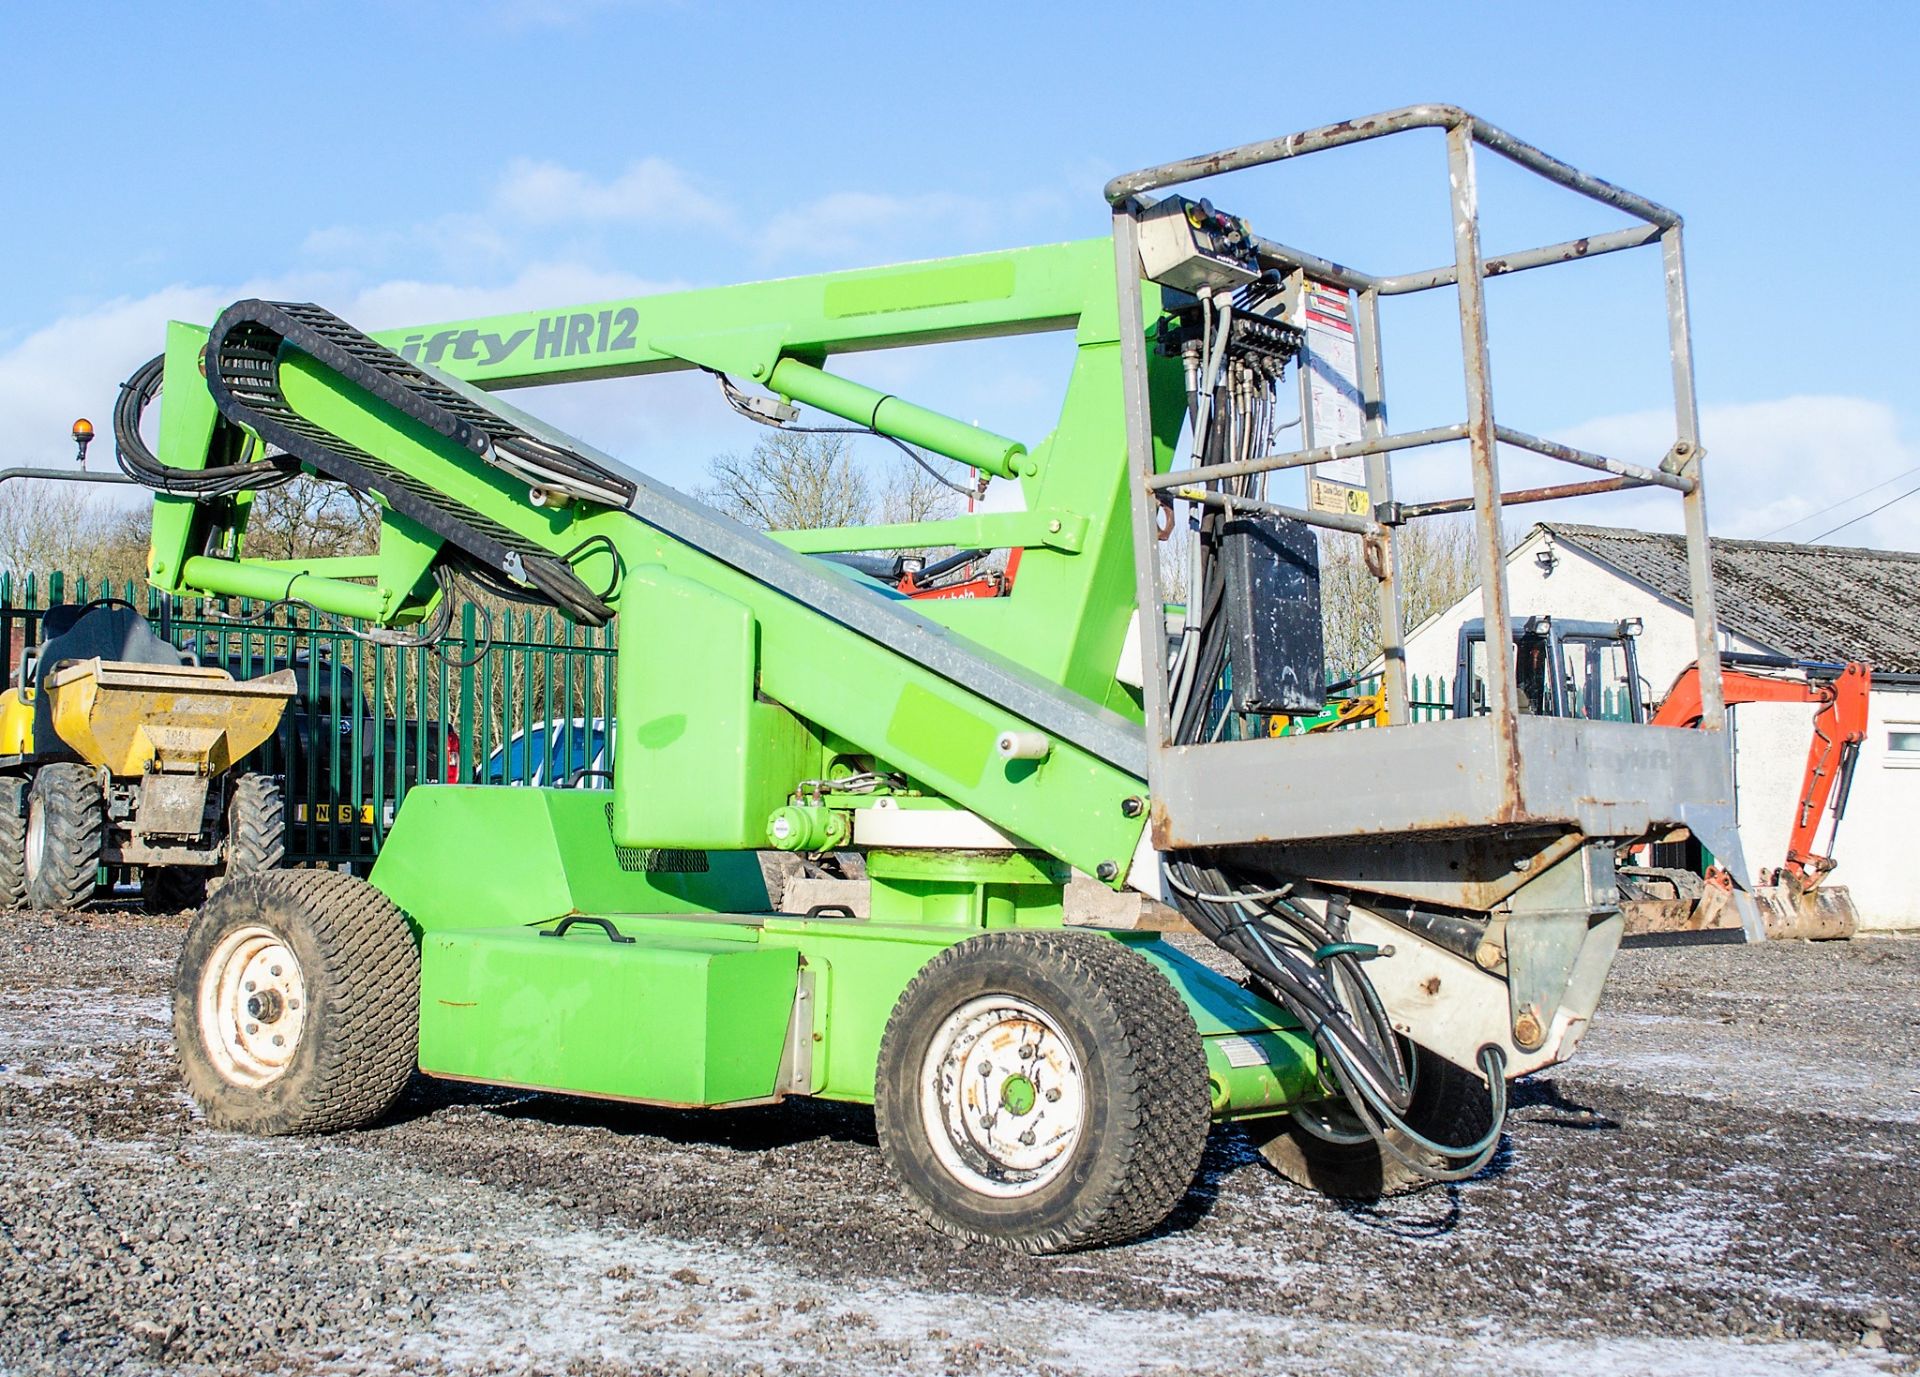 Nifty HR12 battery electric/diesel articulated boom lift access platform Year: 2007 S/N: 16530 SHC - Image 2 of 15